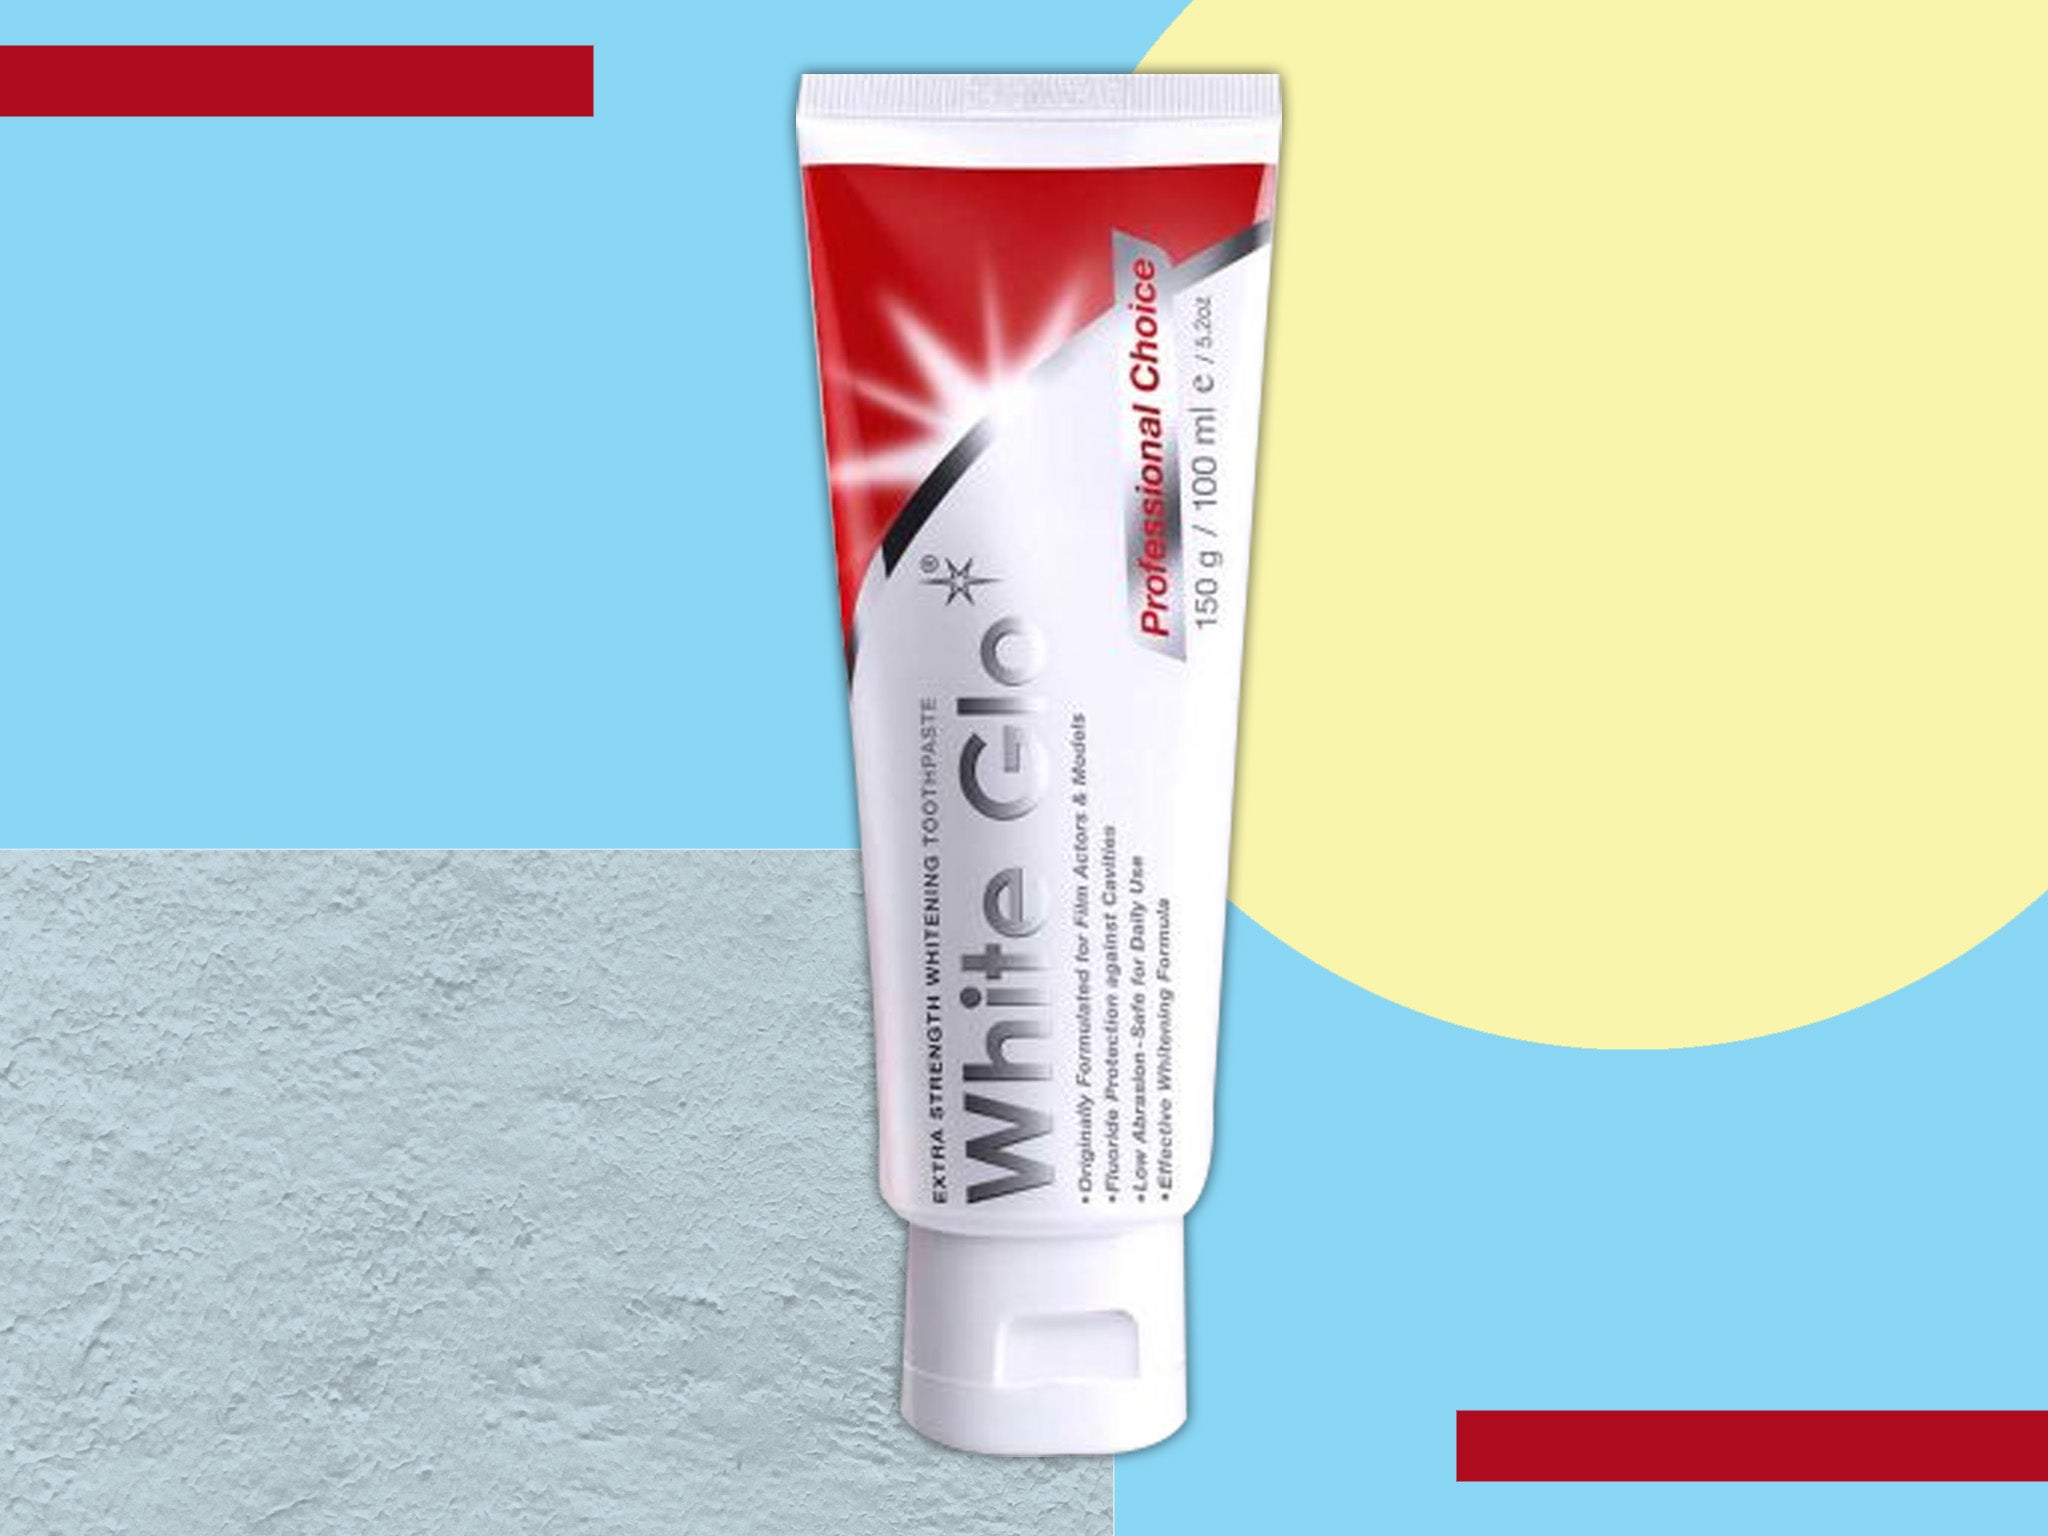 Can White Glo’s whitening toothpaste really protect against tea and coffee stains? 